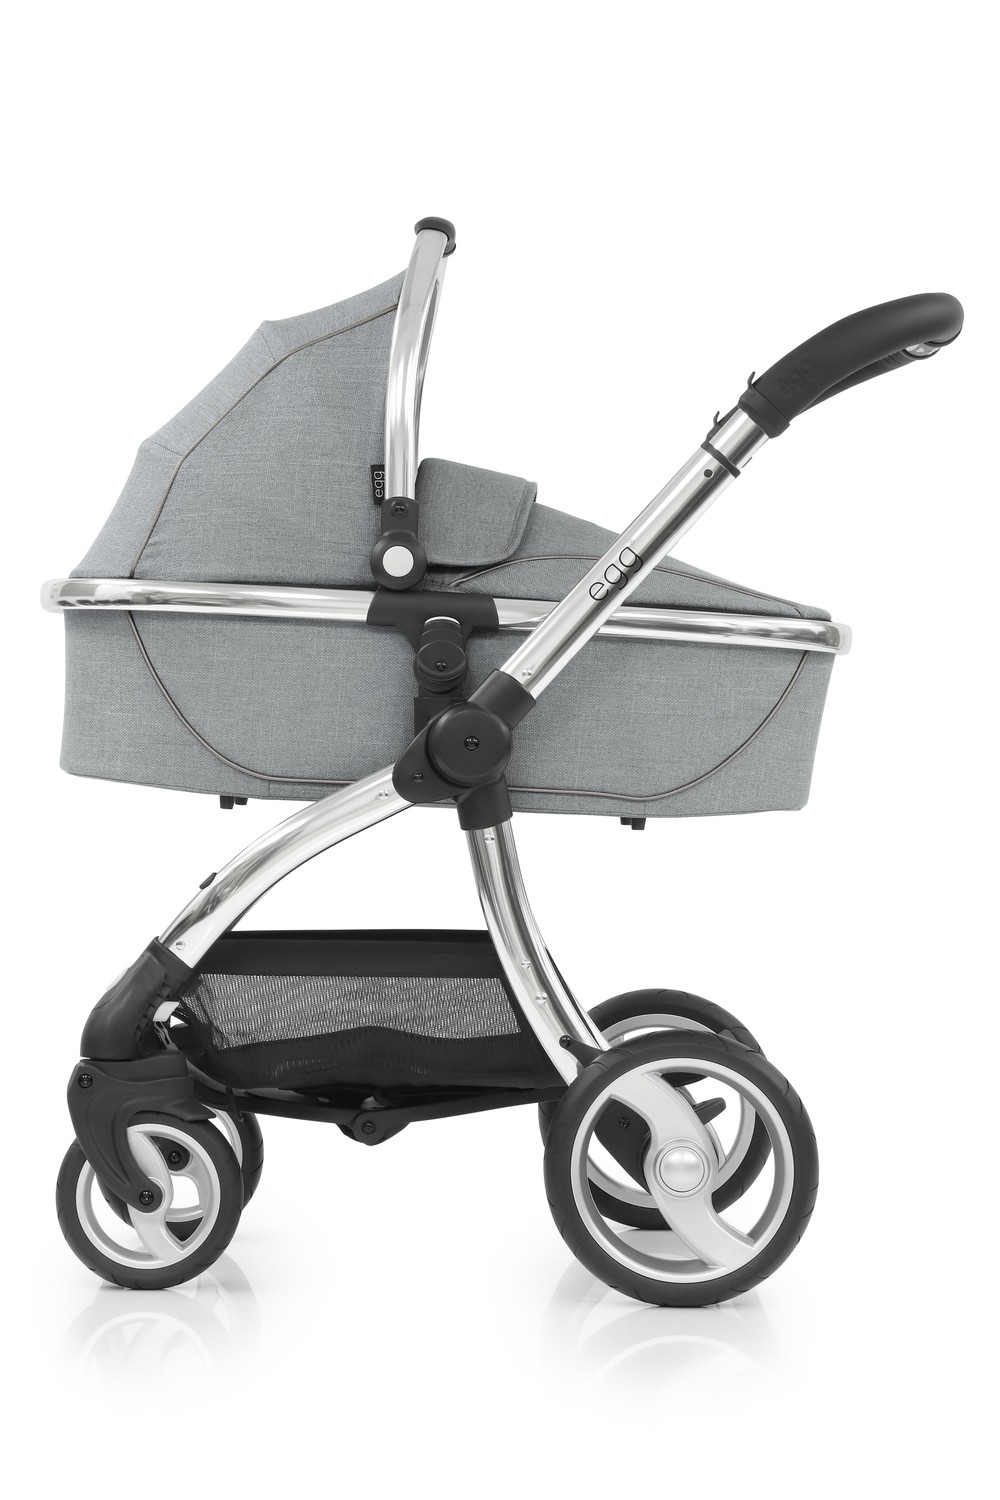 egg stroller with carrycot